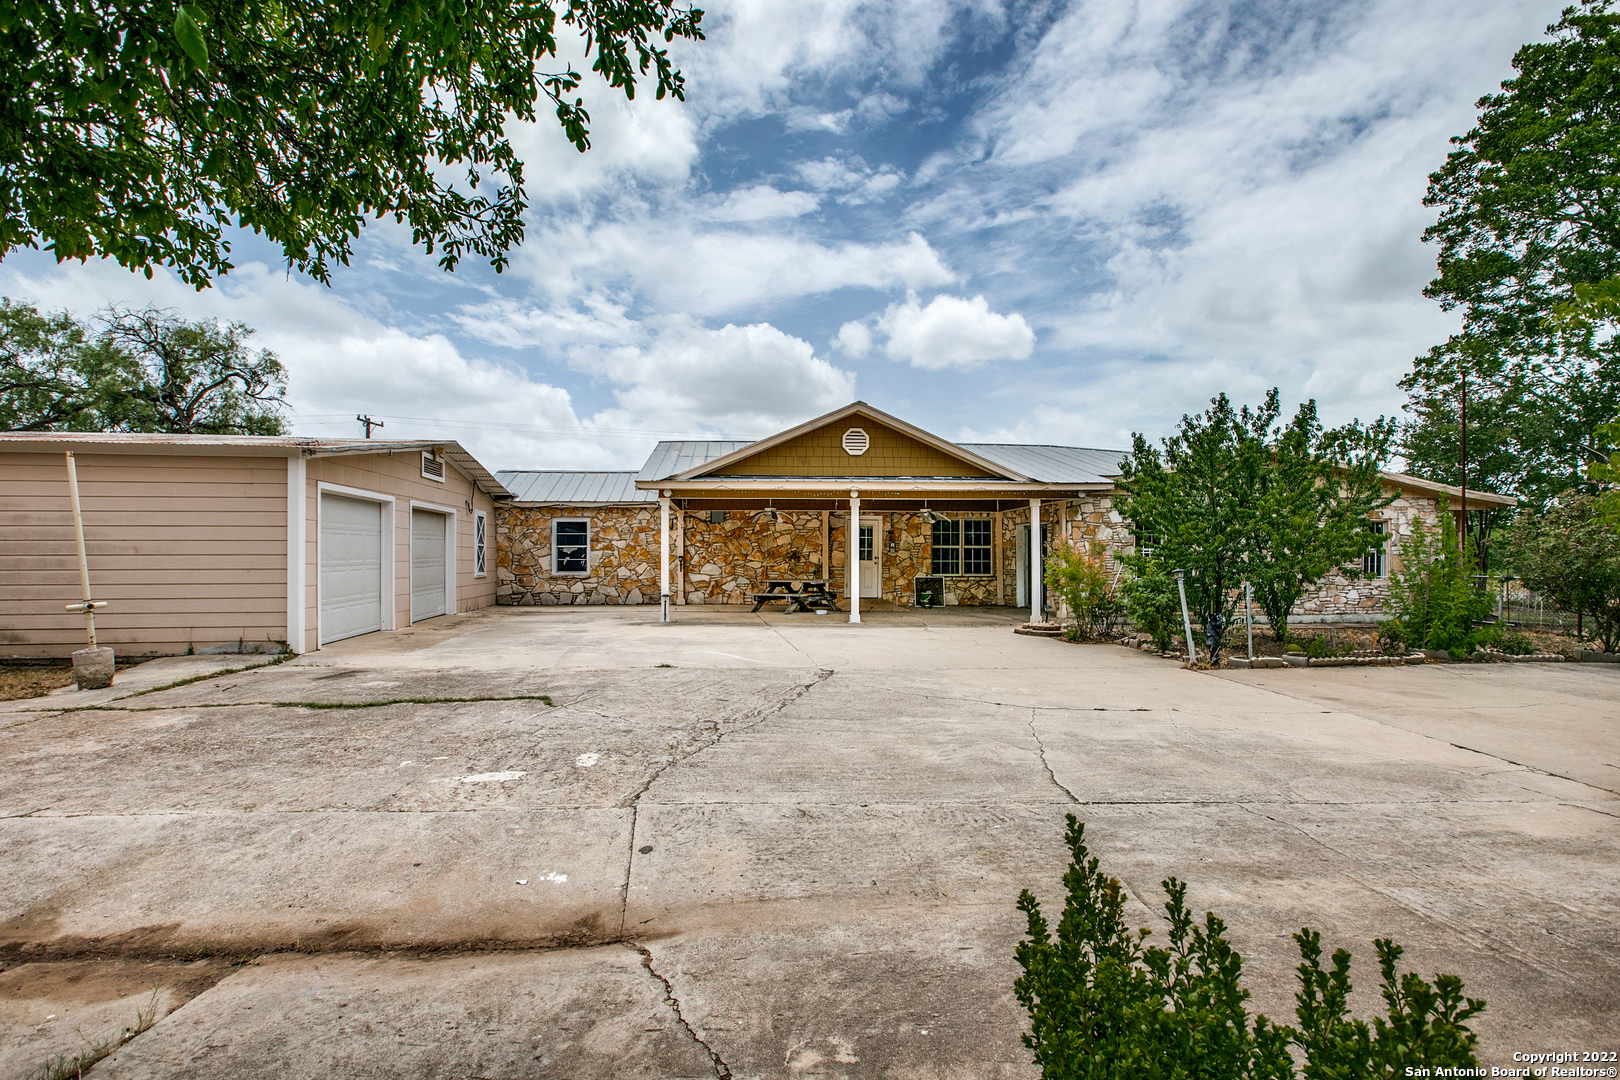 PRIME corner residential home on .71 acres, in a very desirable location in the Southside of San Antonio. This home needs some TLC, but has plenty of room to make as home/office and has plenty of parking! Currently zoned residential, but can be zoned commercial.  Recommend contacting Bexar County zoning division to see if it can be zoned for your business.  Fenced was removed dividing 9756 Southton and 9758 Southton allowing owners to walk to work (restaurant building for sale as well).  Not many corner lots become available with this type of potential for home owners or business owners.  Just minutes away from HWY 410, with easy access to Brooks City Base, 281 N, 37 South, Texas A&M San Antonio, restaurants, retail and much more.